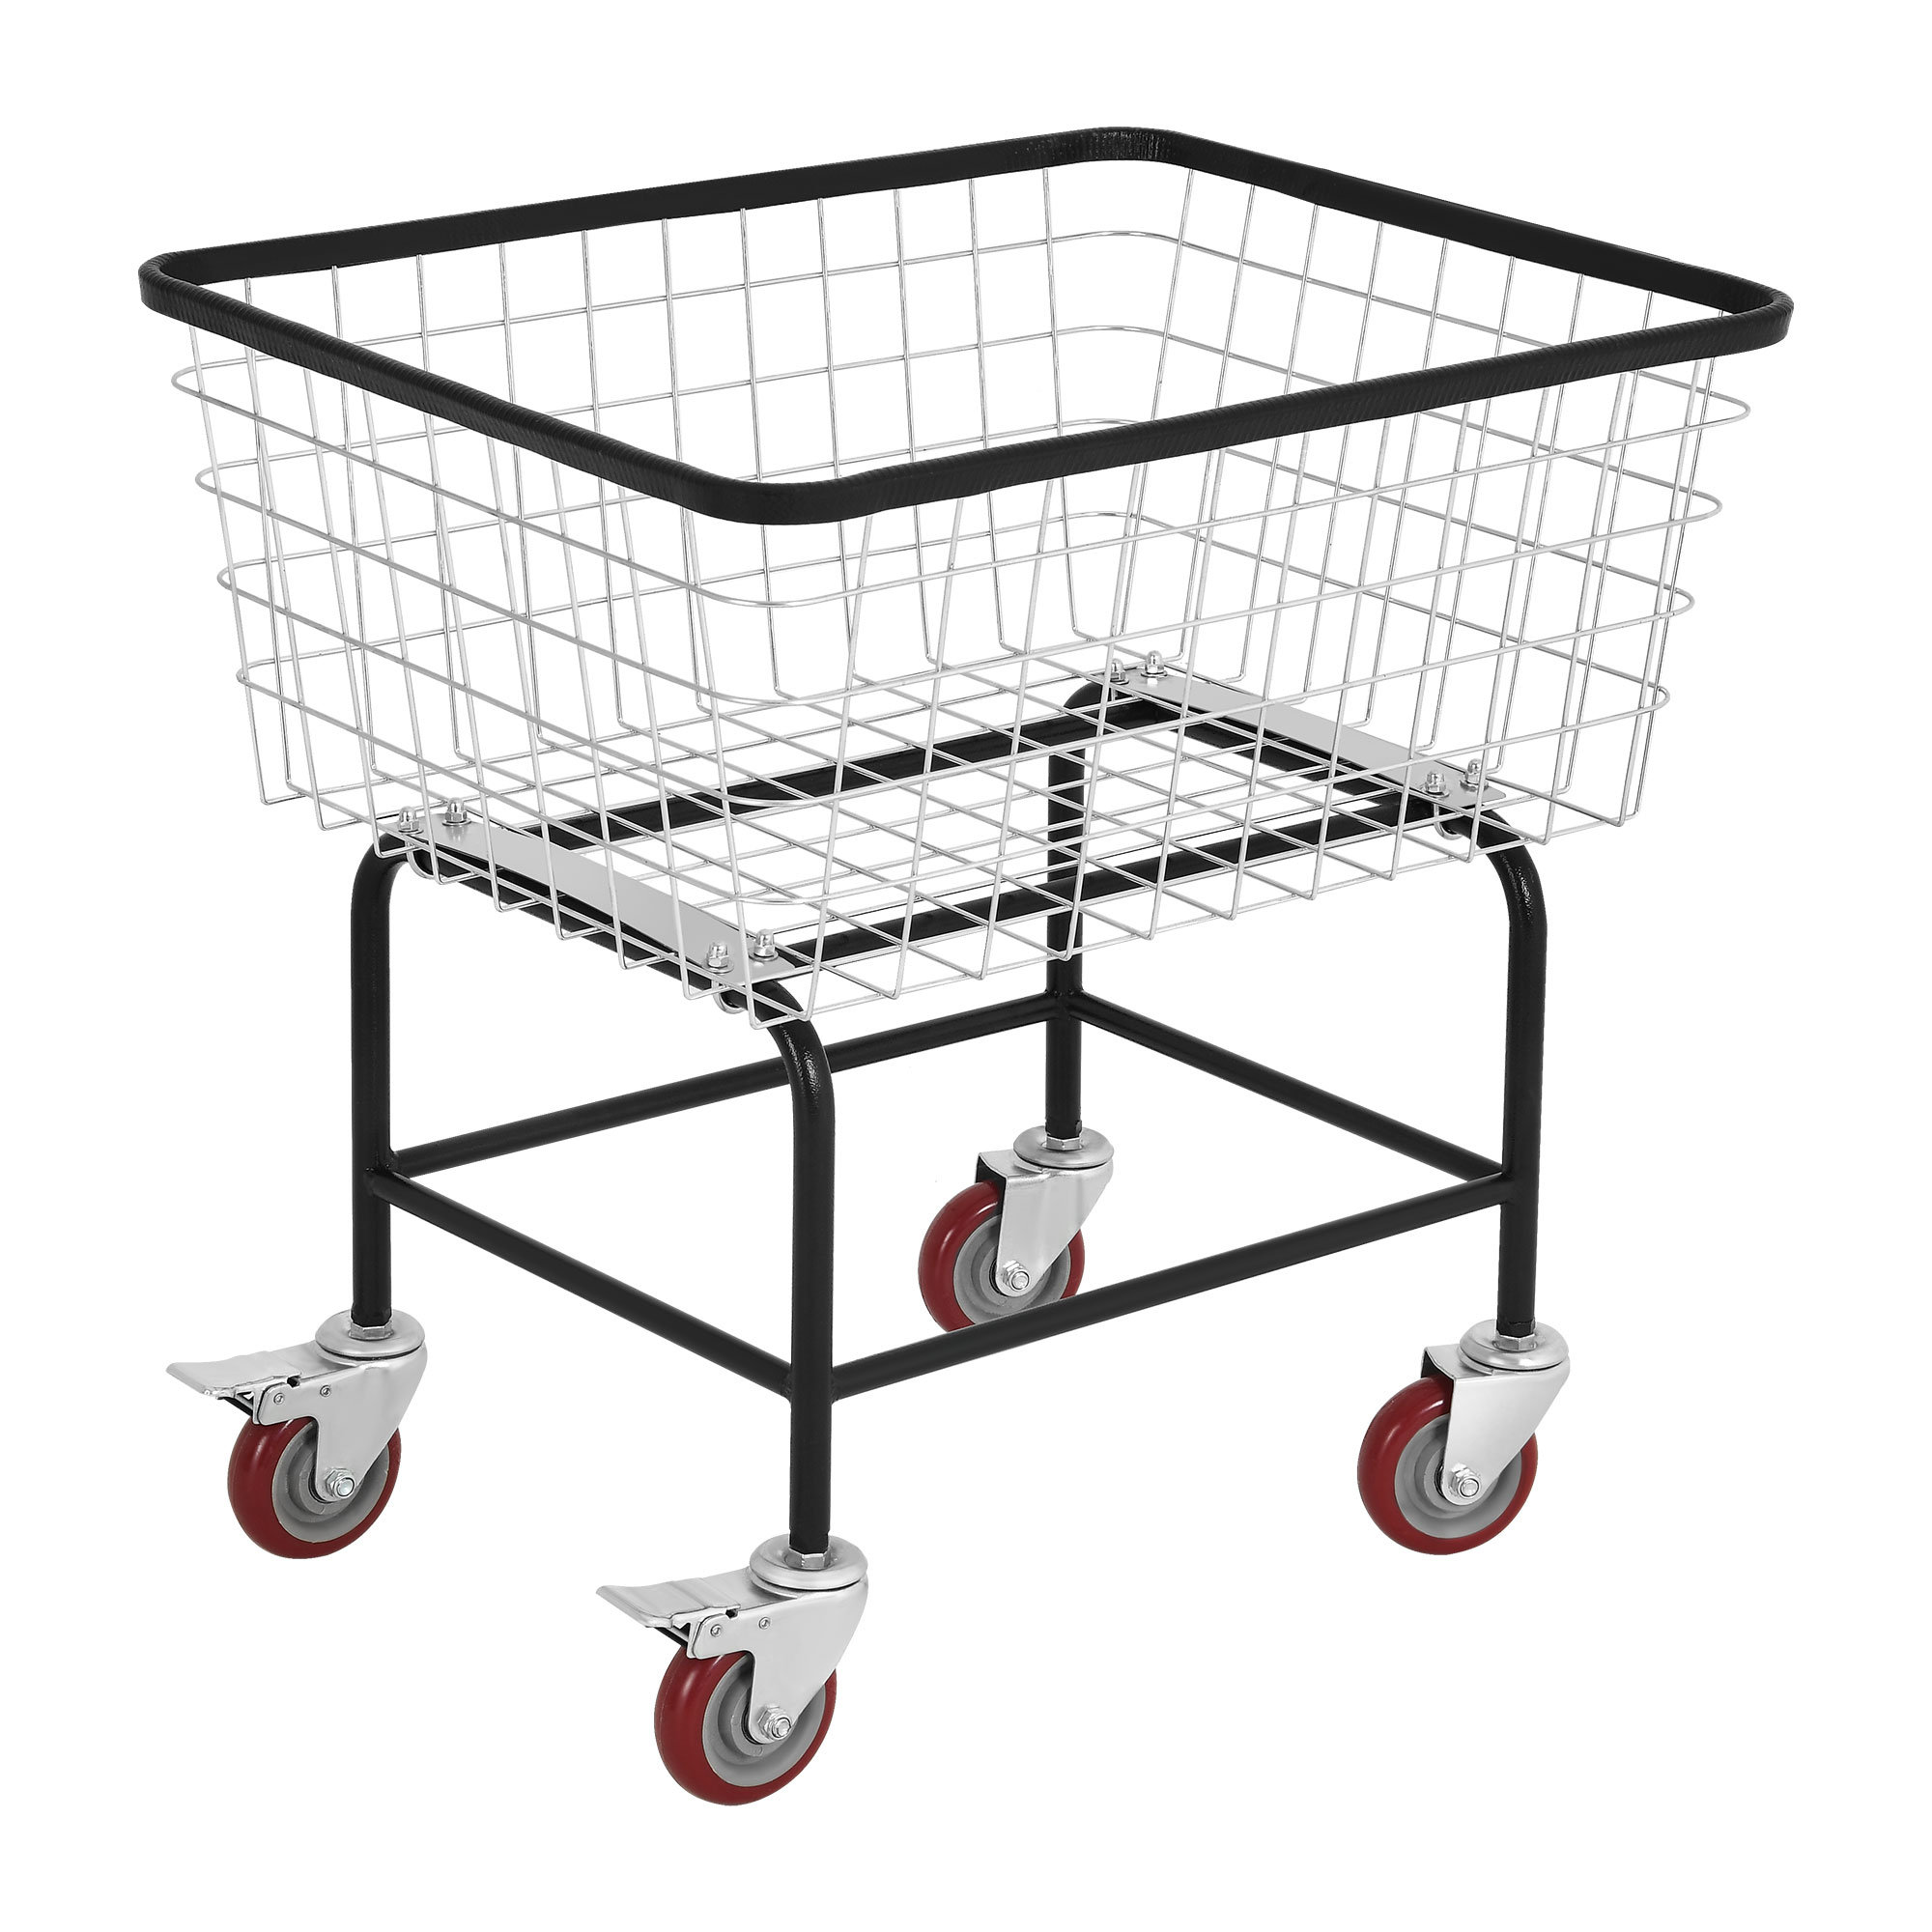 E-Z Roll Wheeled Wire Rack and Dispenser - Compact and Light-weight design